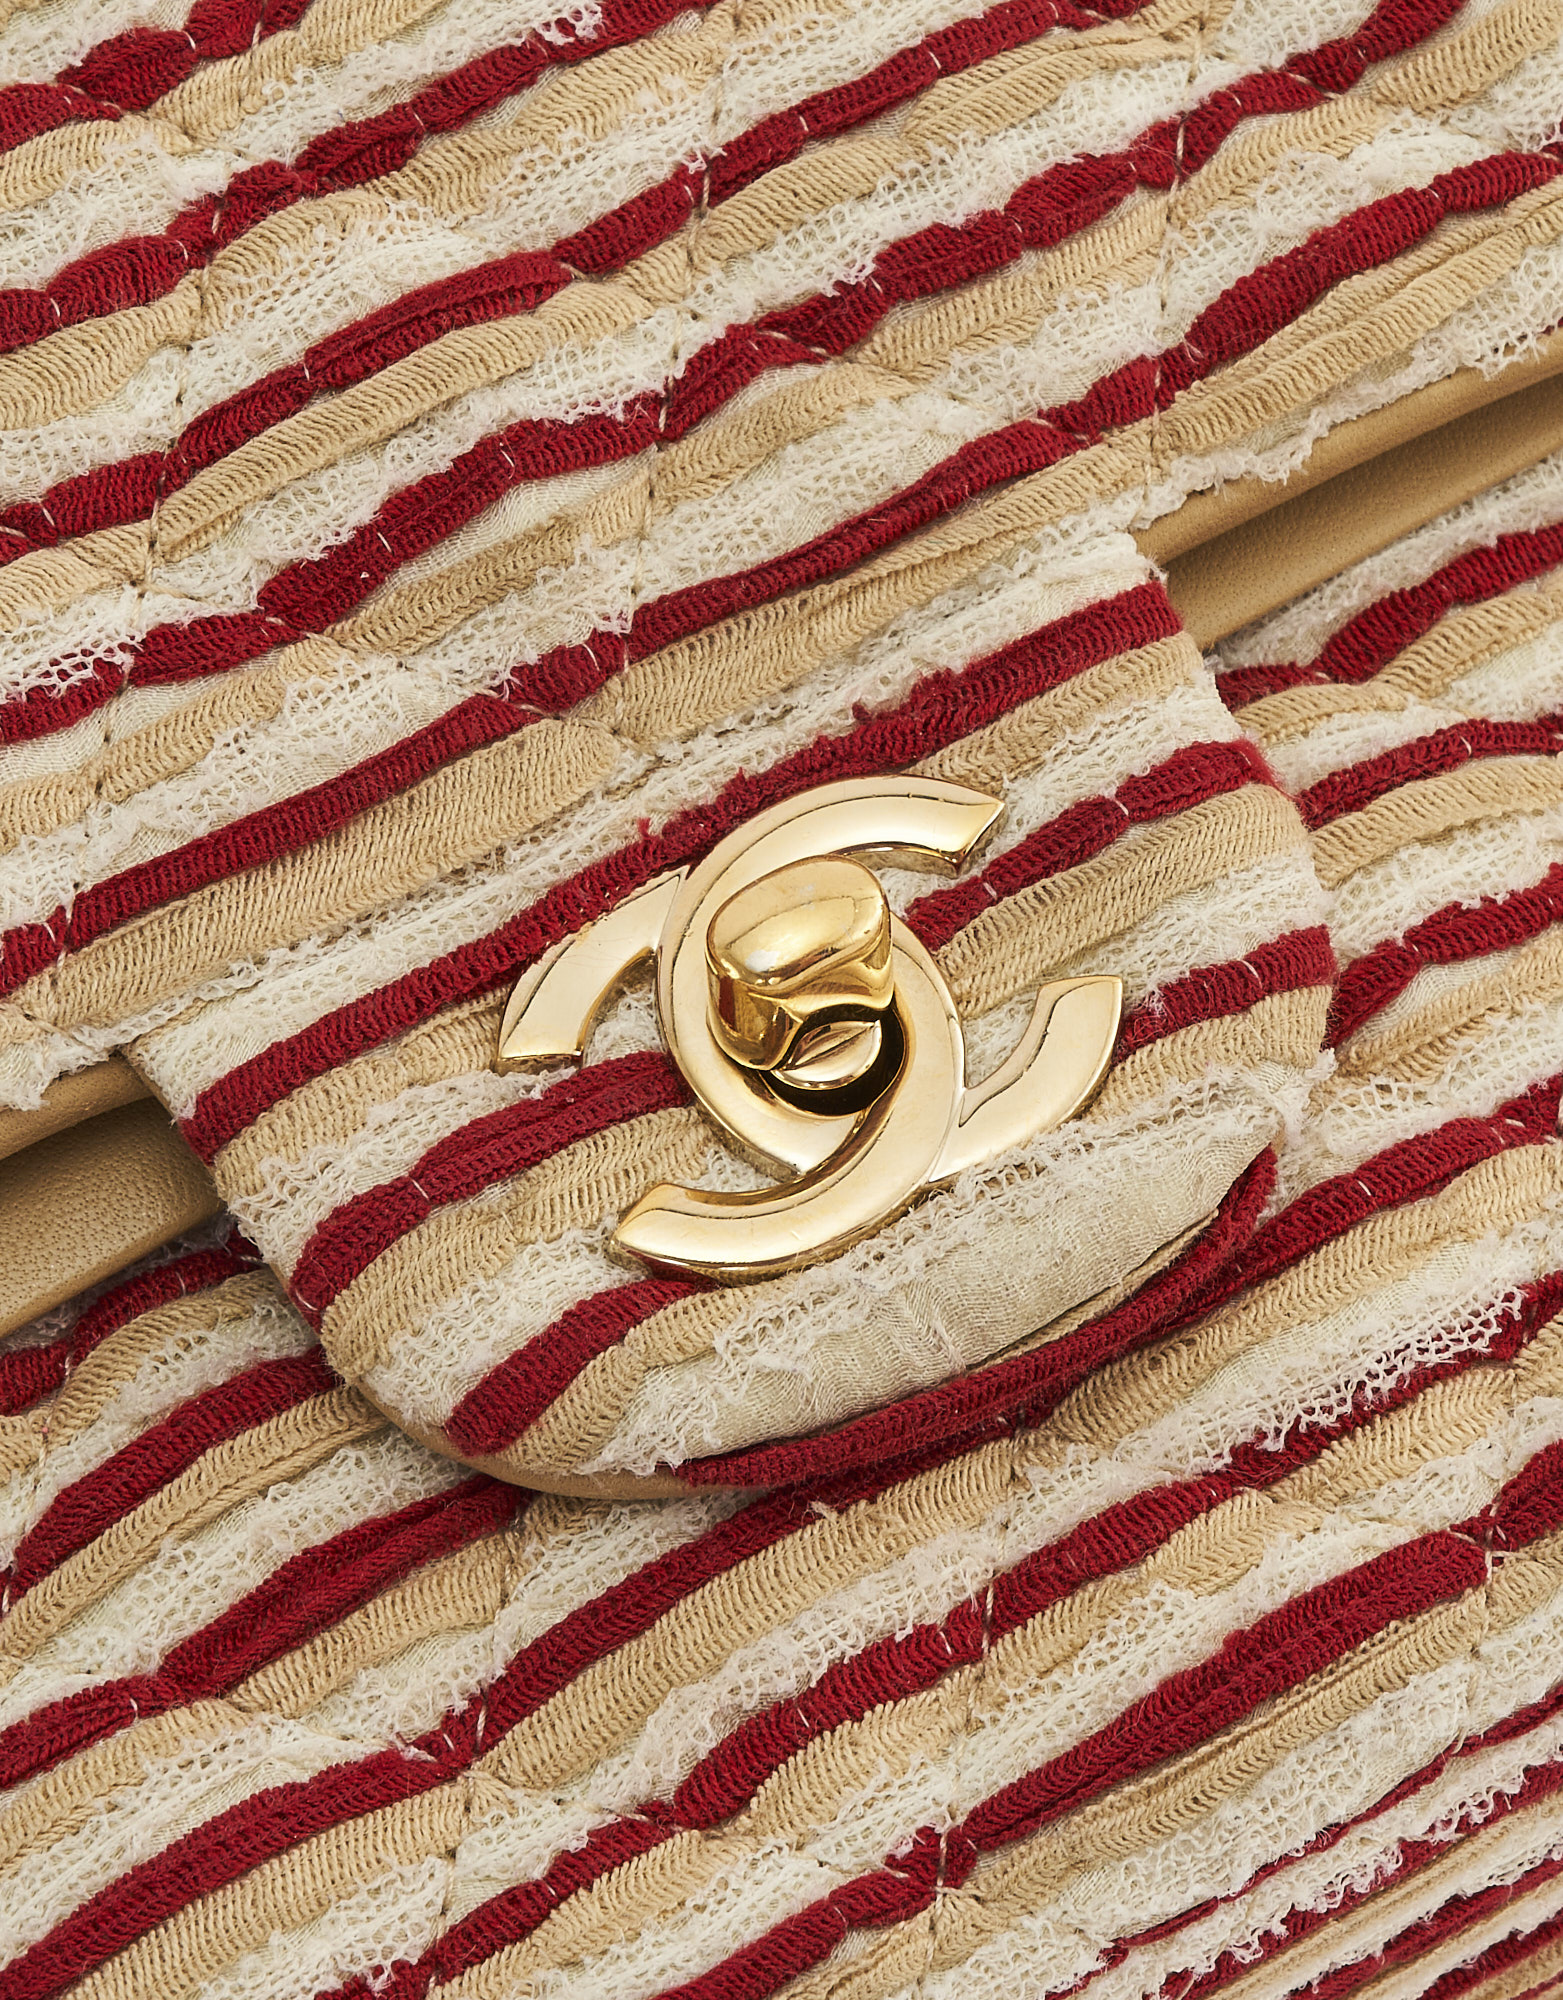 Gold hardware detail on a limited-edition Chanel Timeless Medium made from Fabric and Pearls in Red and White on SACLÀB